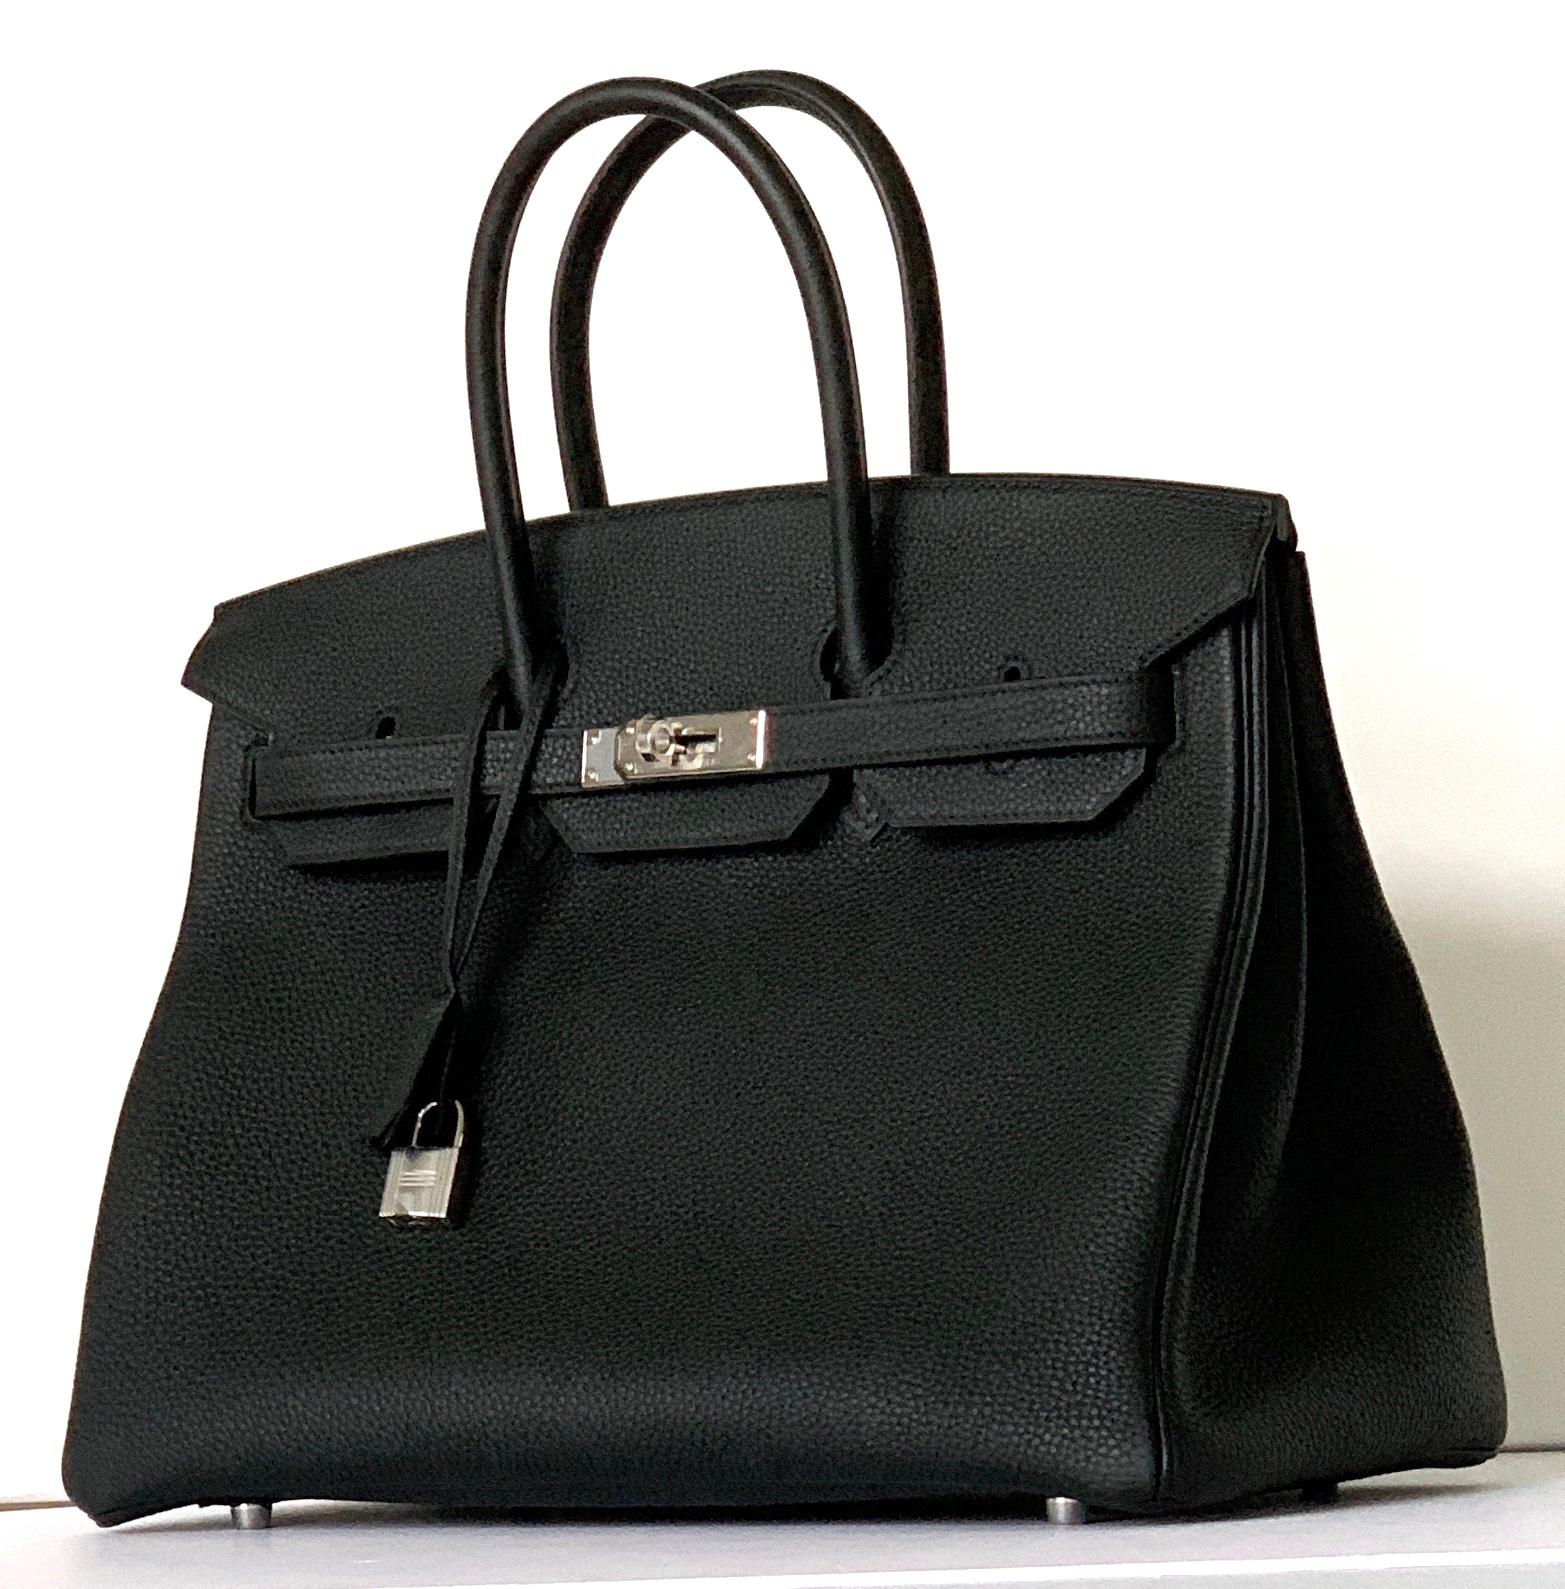 Hermès Birkin  
35cm Black Togo
Togo is a pebbled leather that is loved because it is scratch resistant
Palladium Hardware
One of the most sought after combinations of the black with silver
Collection D, the newest from Hermes
This Birkin has tonal